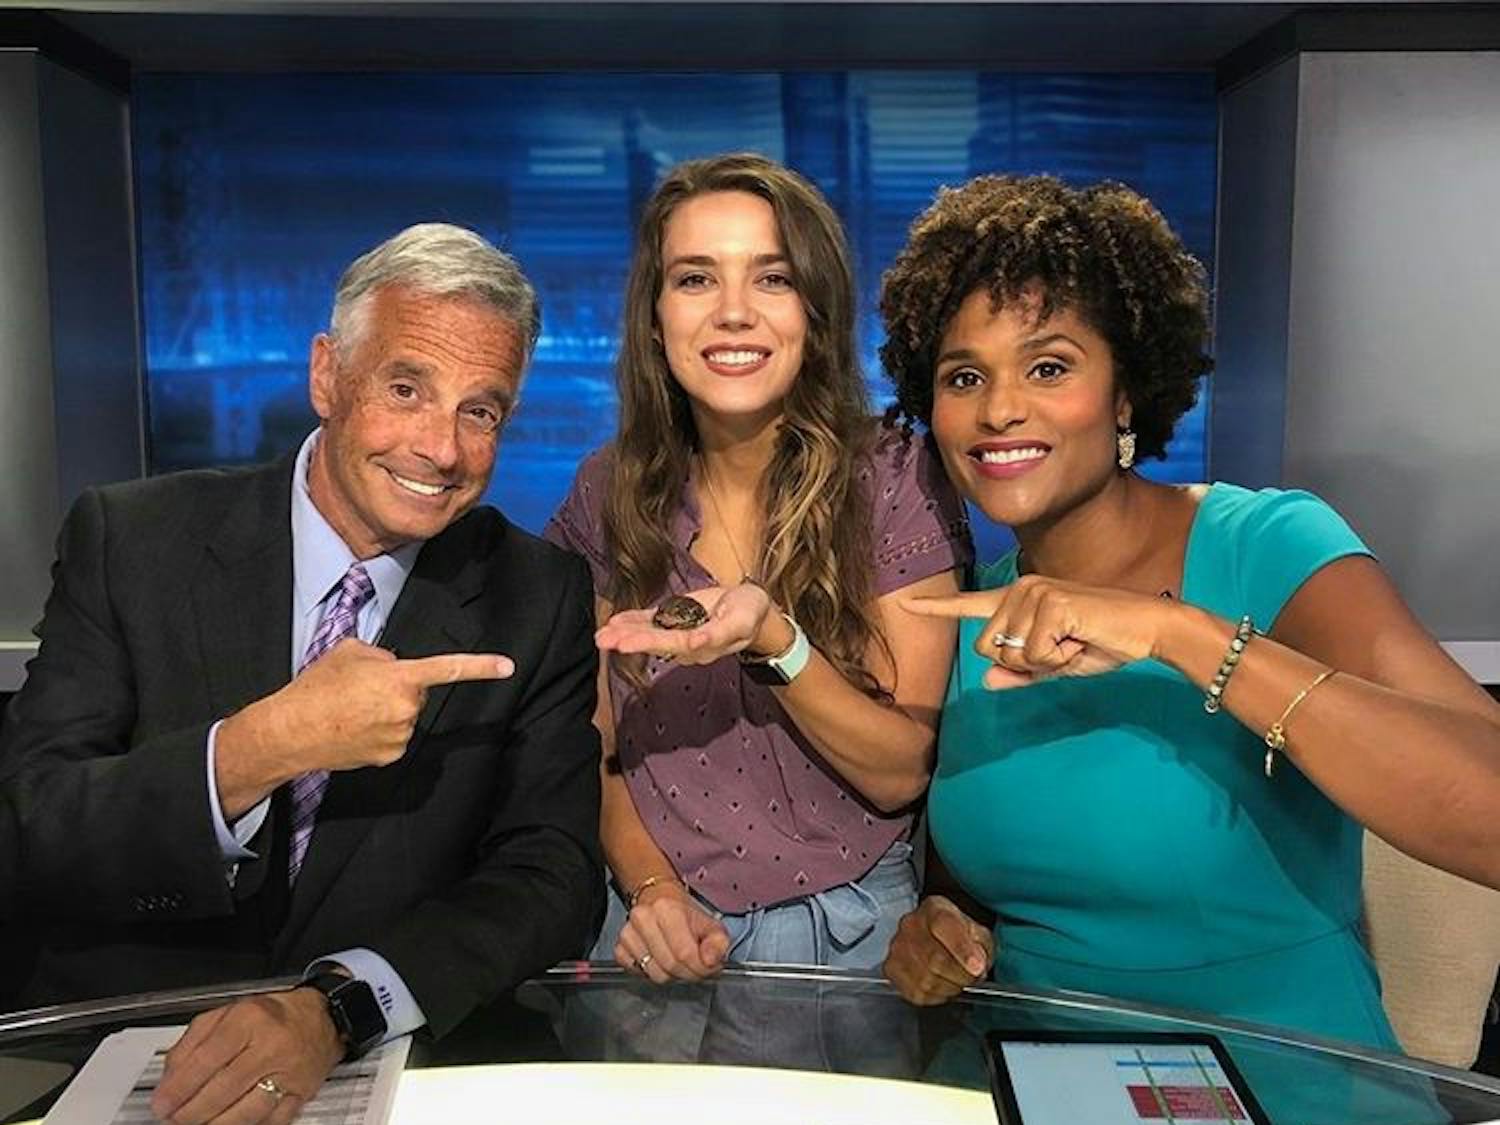 Savannah Mikell (center) and Toby the Toad appeared on Jacksonville's WJXT Channel 4 News on July 31.